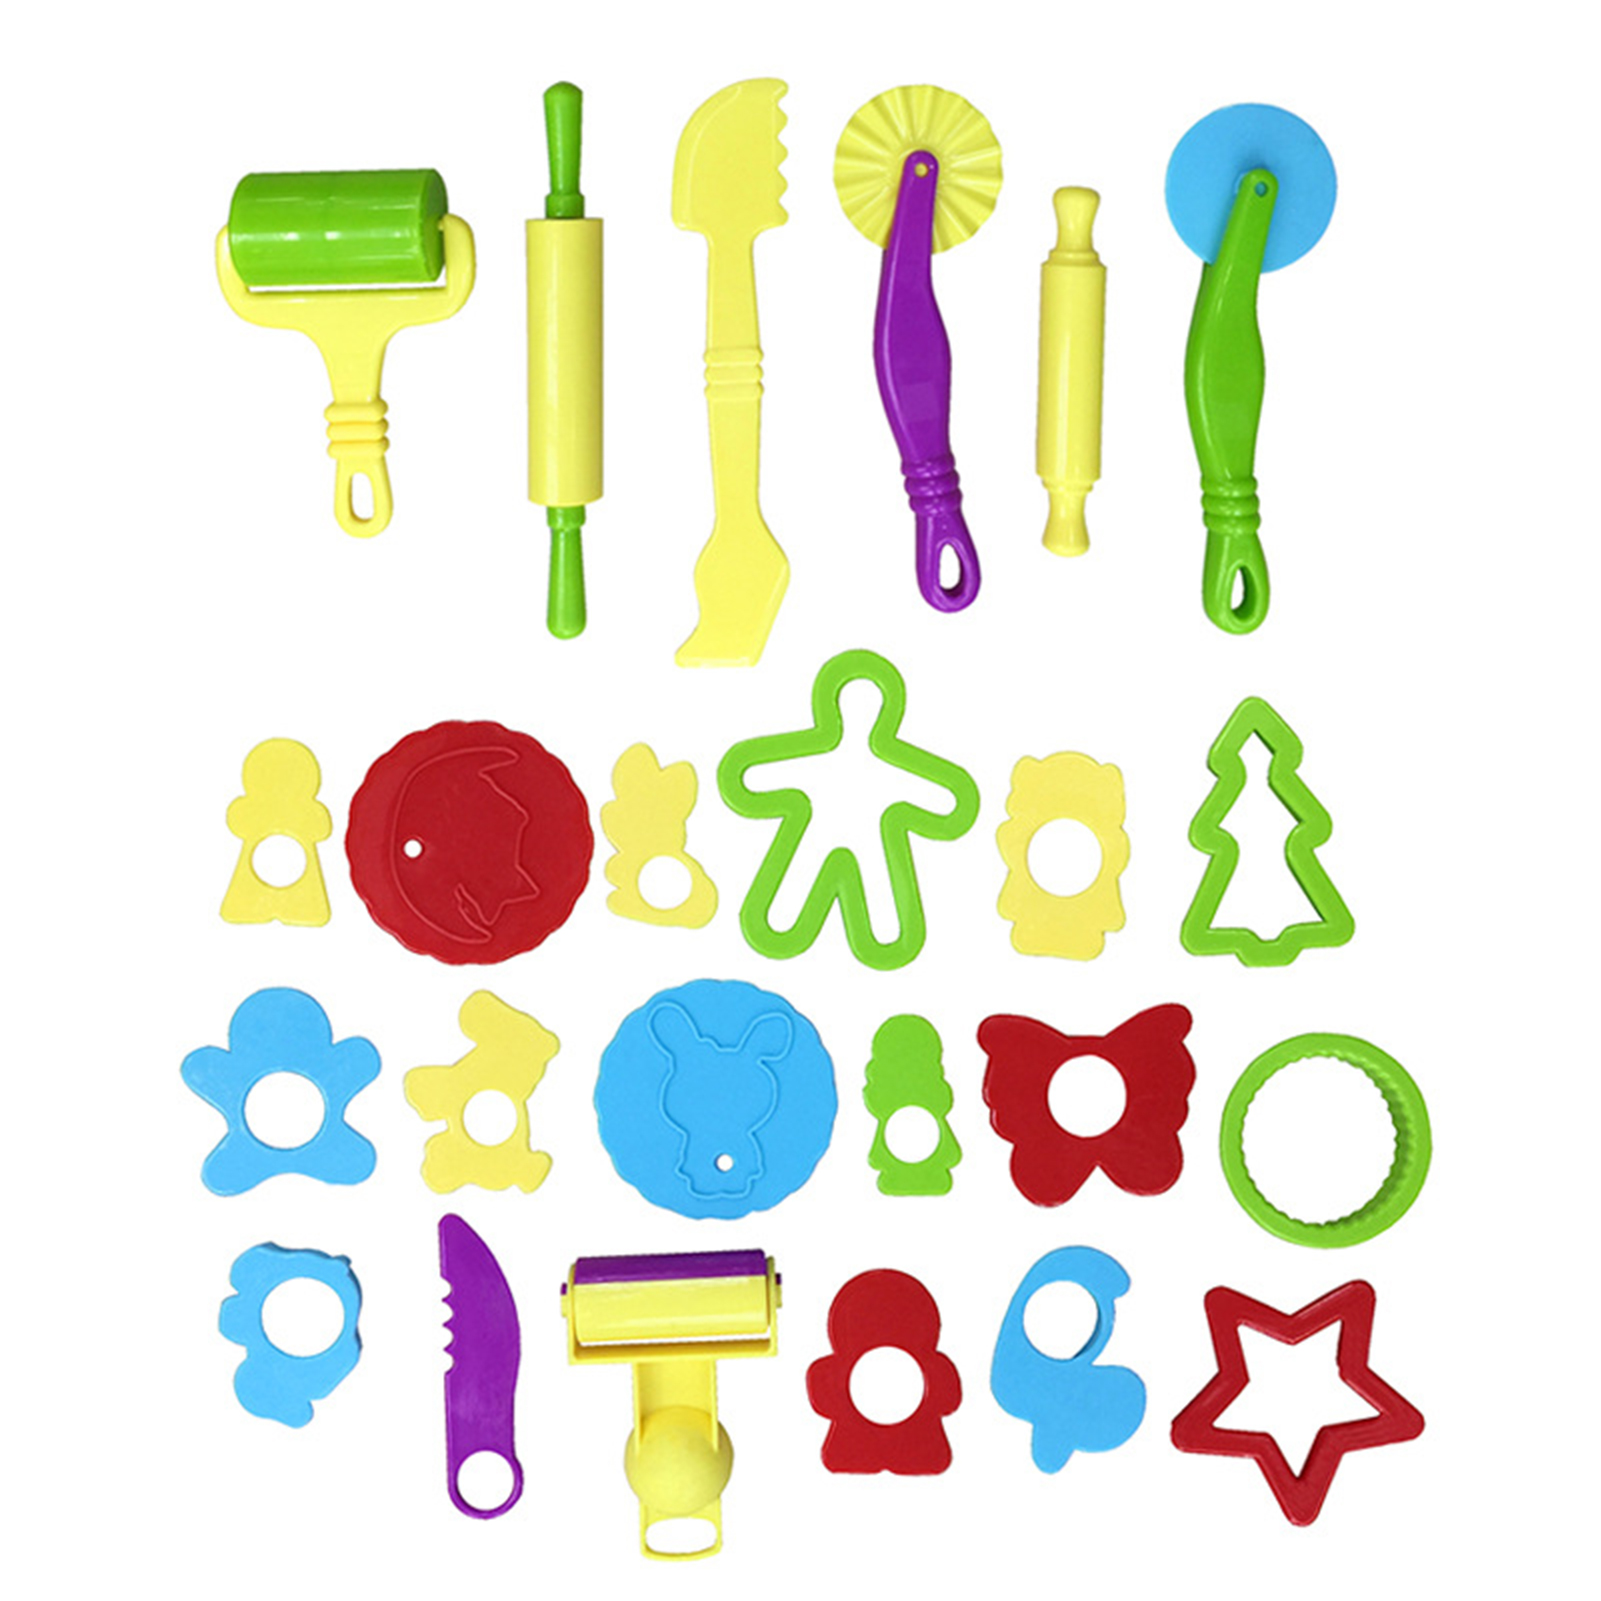 Dcenta 29 Pieces Play Dough Tools Playdough Accessories Set Various Molds Rollers Cutters Educational Gift for Children, Random Color, Size: 29pcs Set